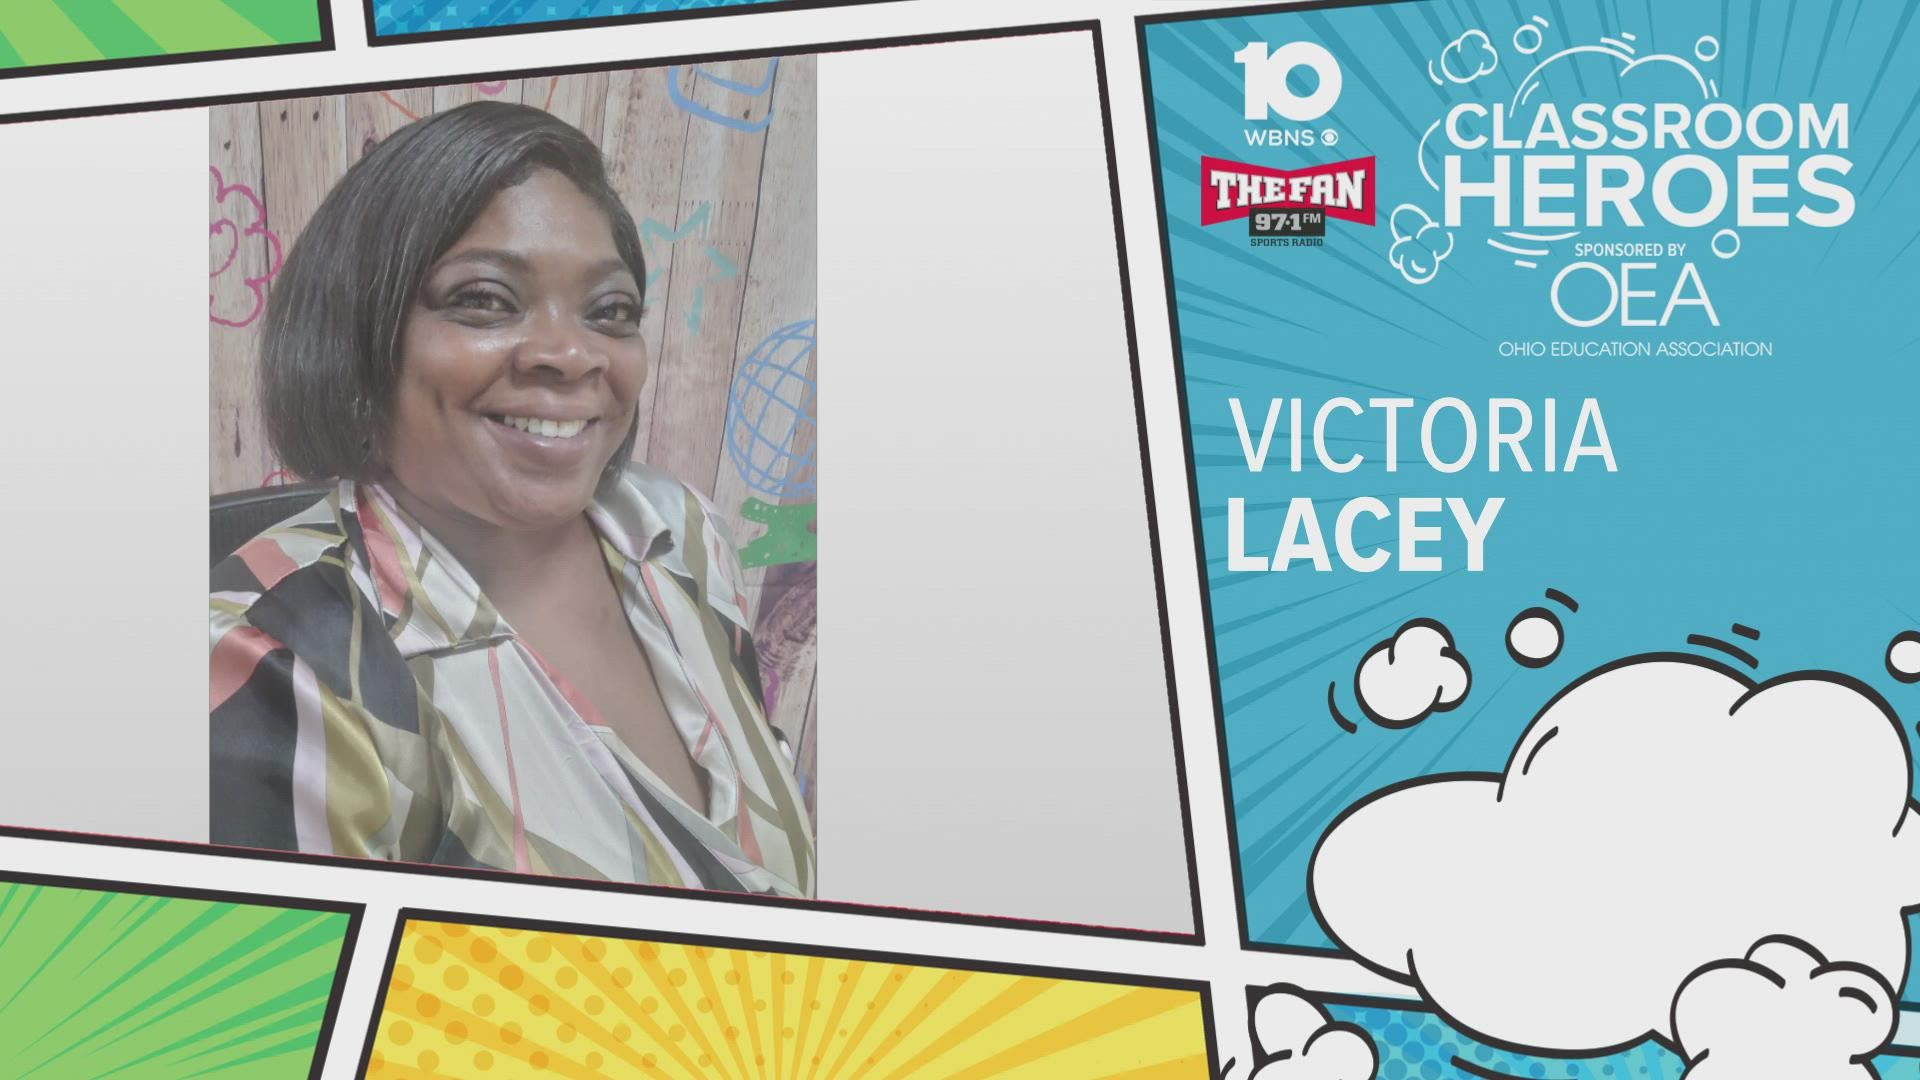 It's time to honor a Classroom Hero. This week, we are featuring Victory Lacey from the Linden Park Early Education Center.